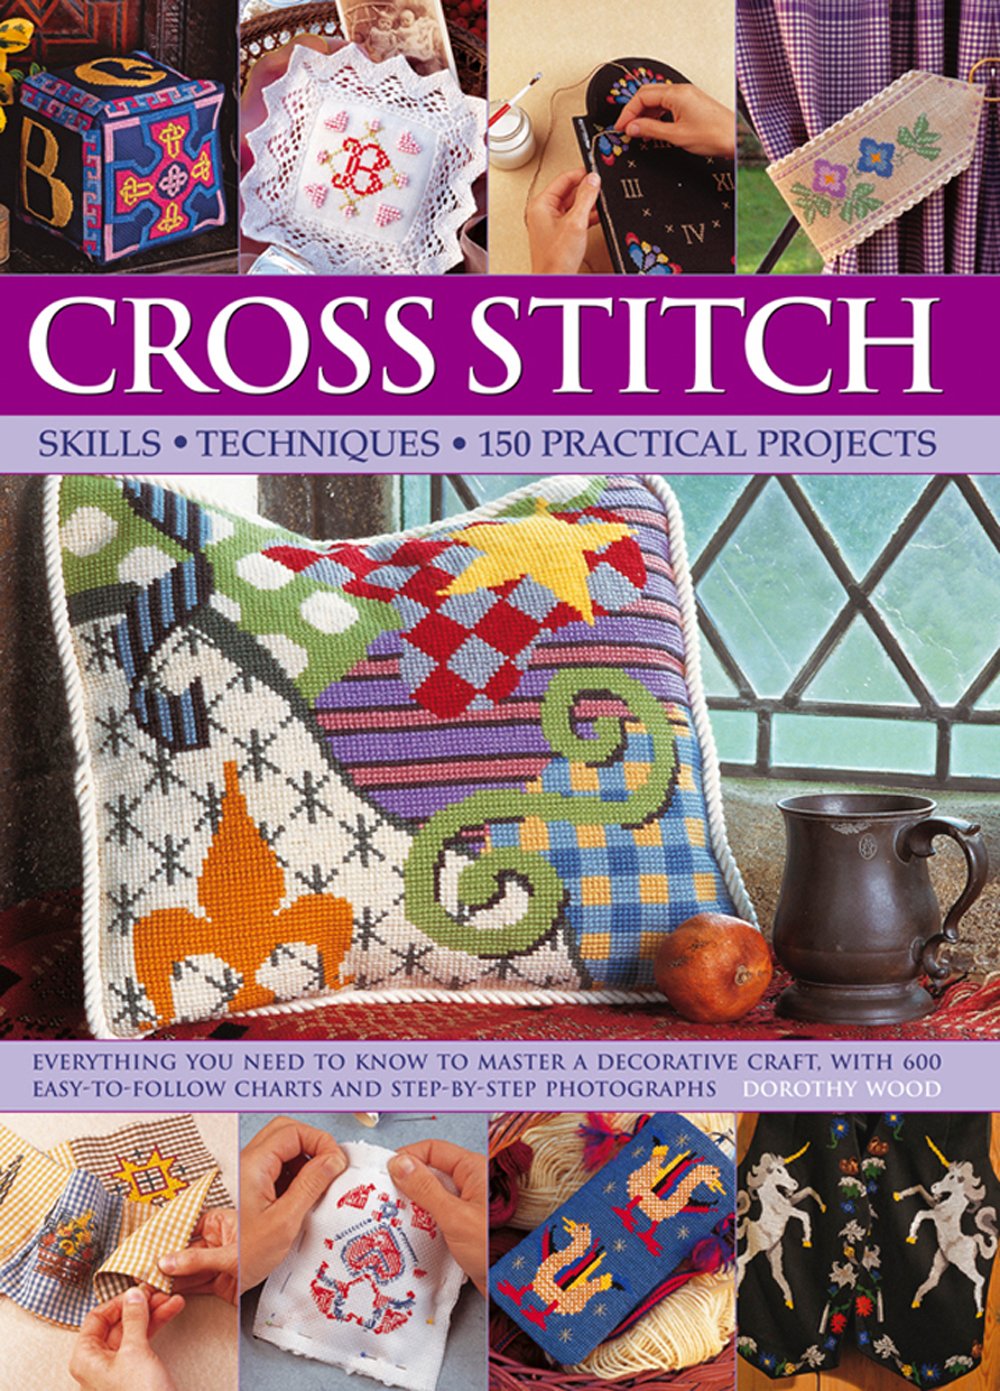 Cross Stitch: Skills, Techniques, 150 Practical Projects